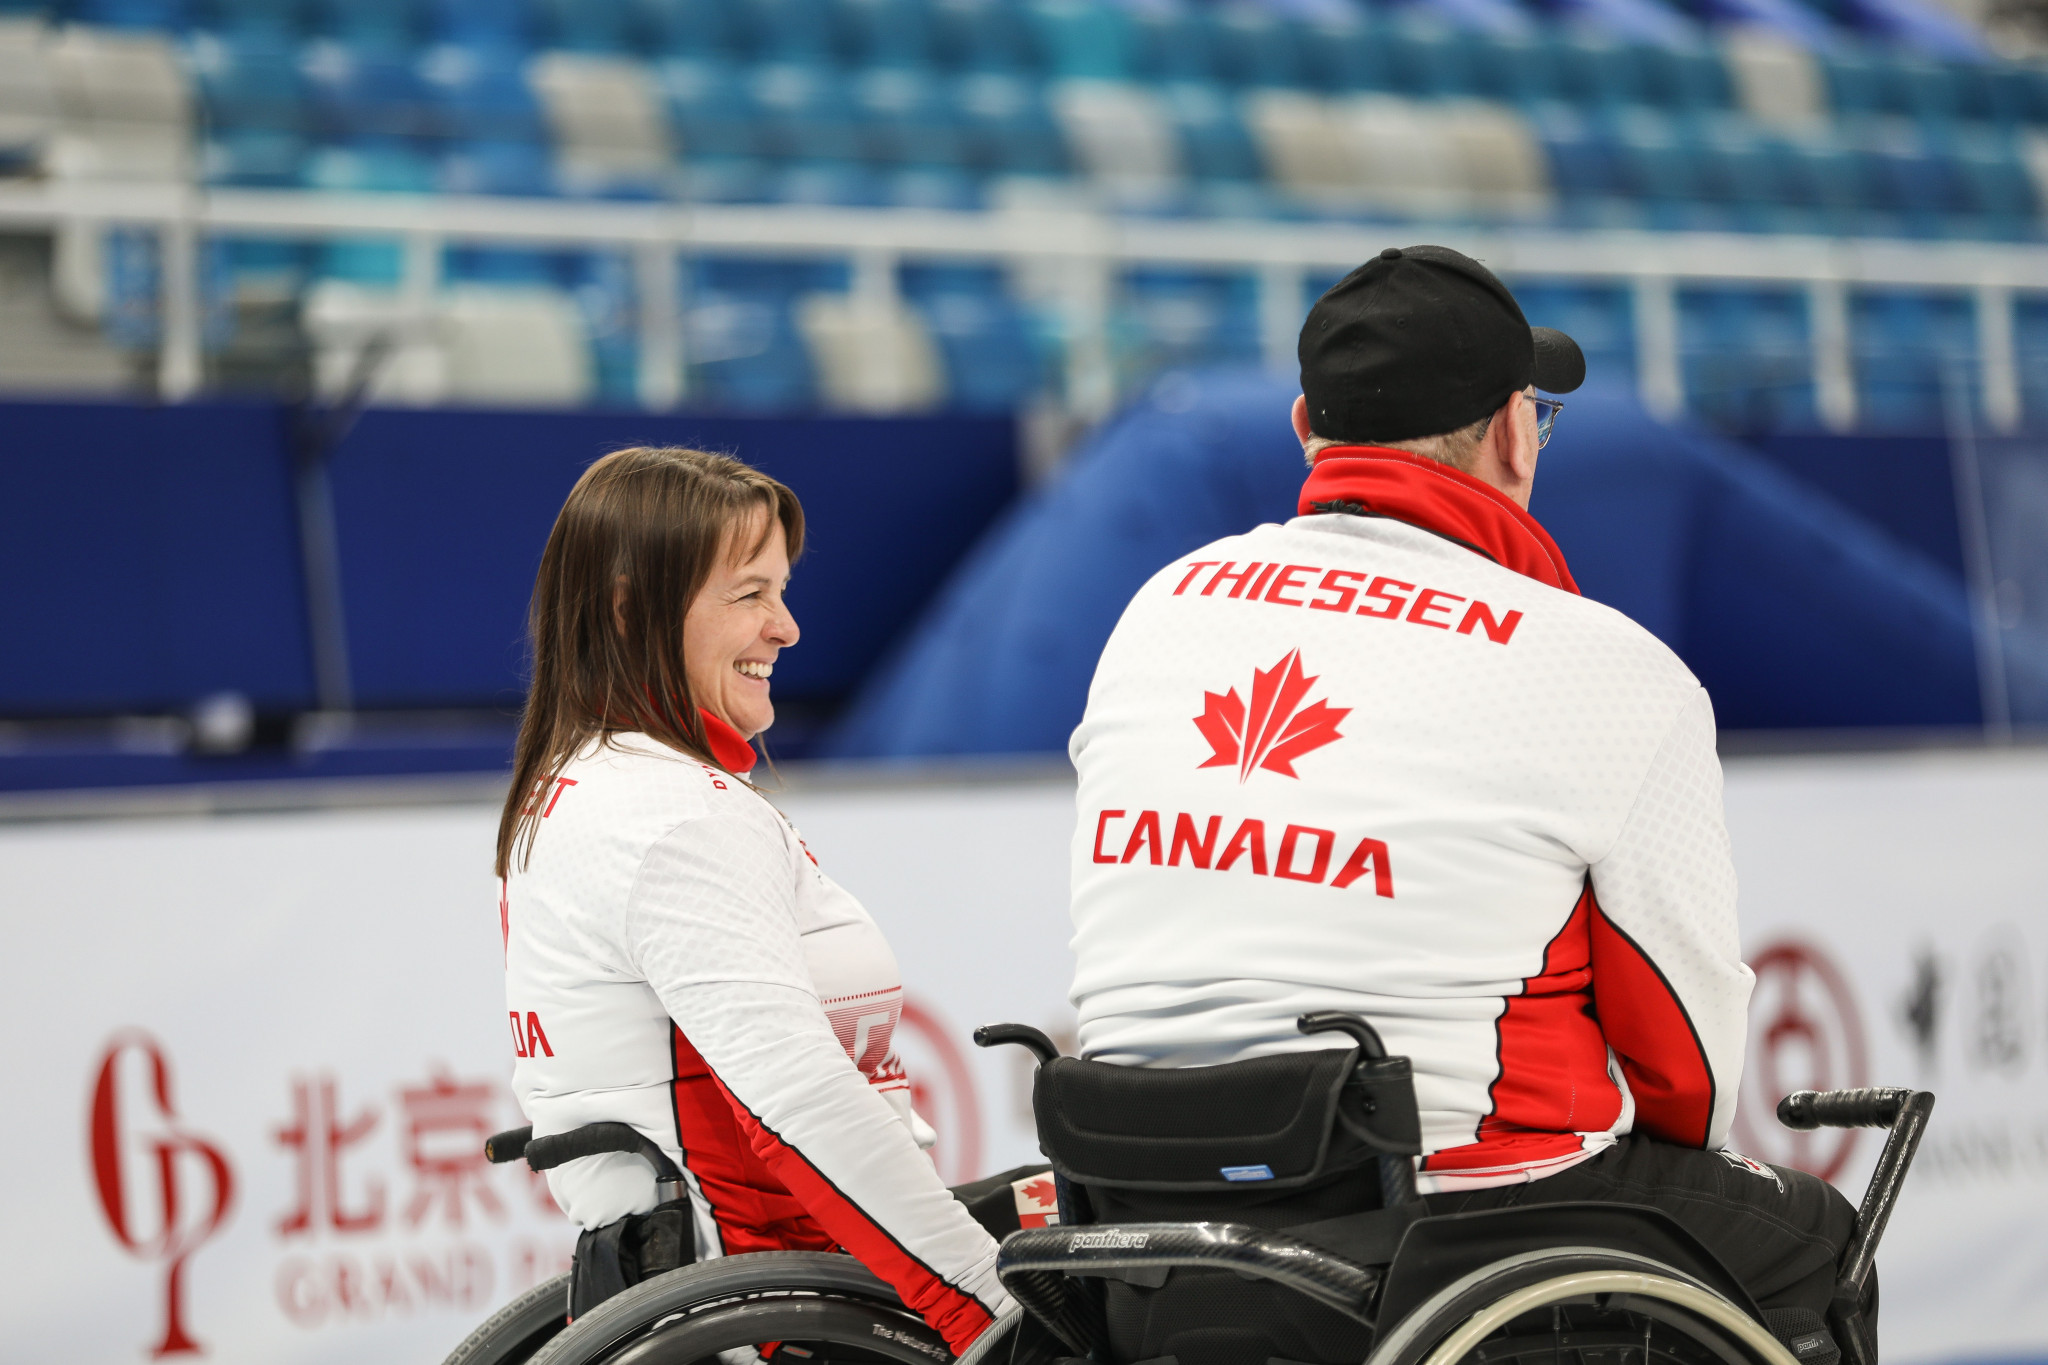 Canada squeaked into the quarter-finals with a tense 7-6 win over Italy in the evening session ©World Curling